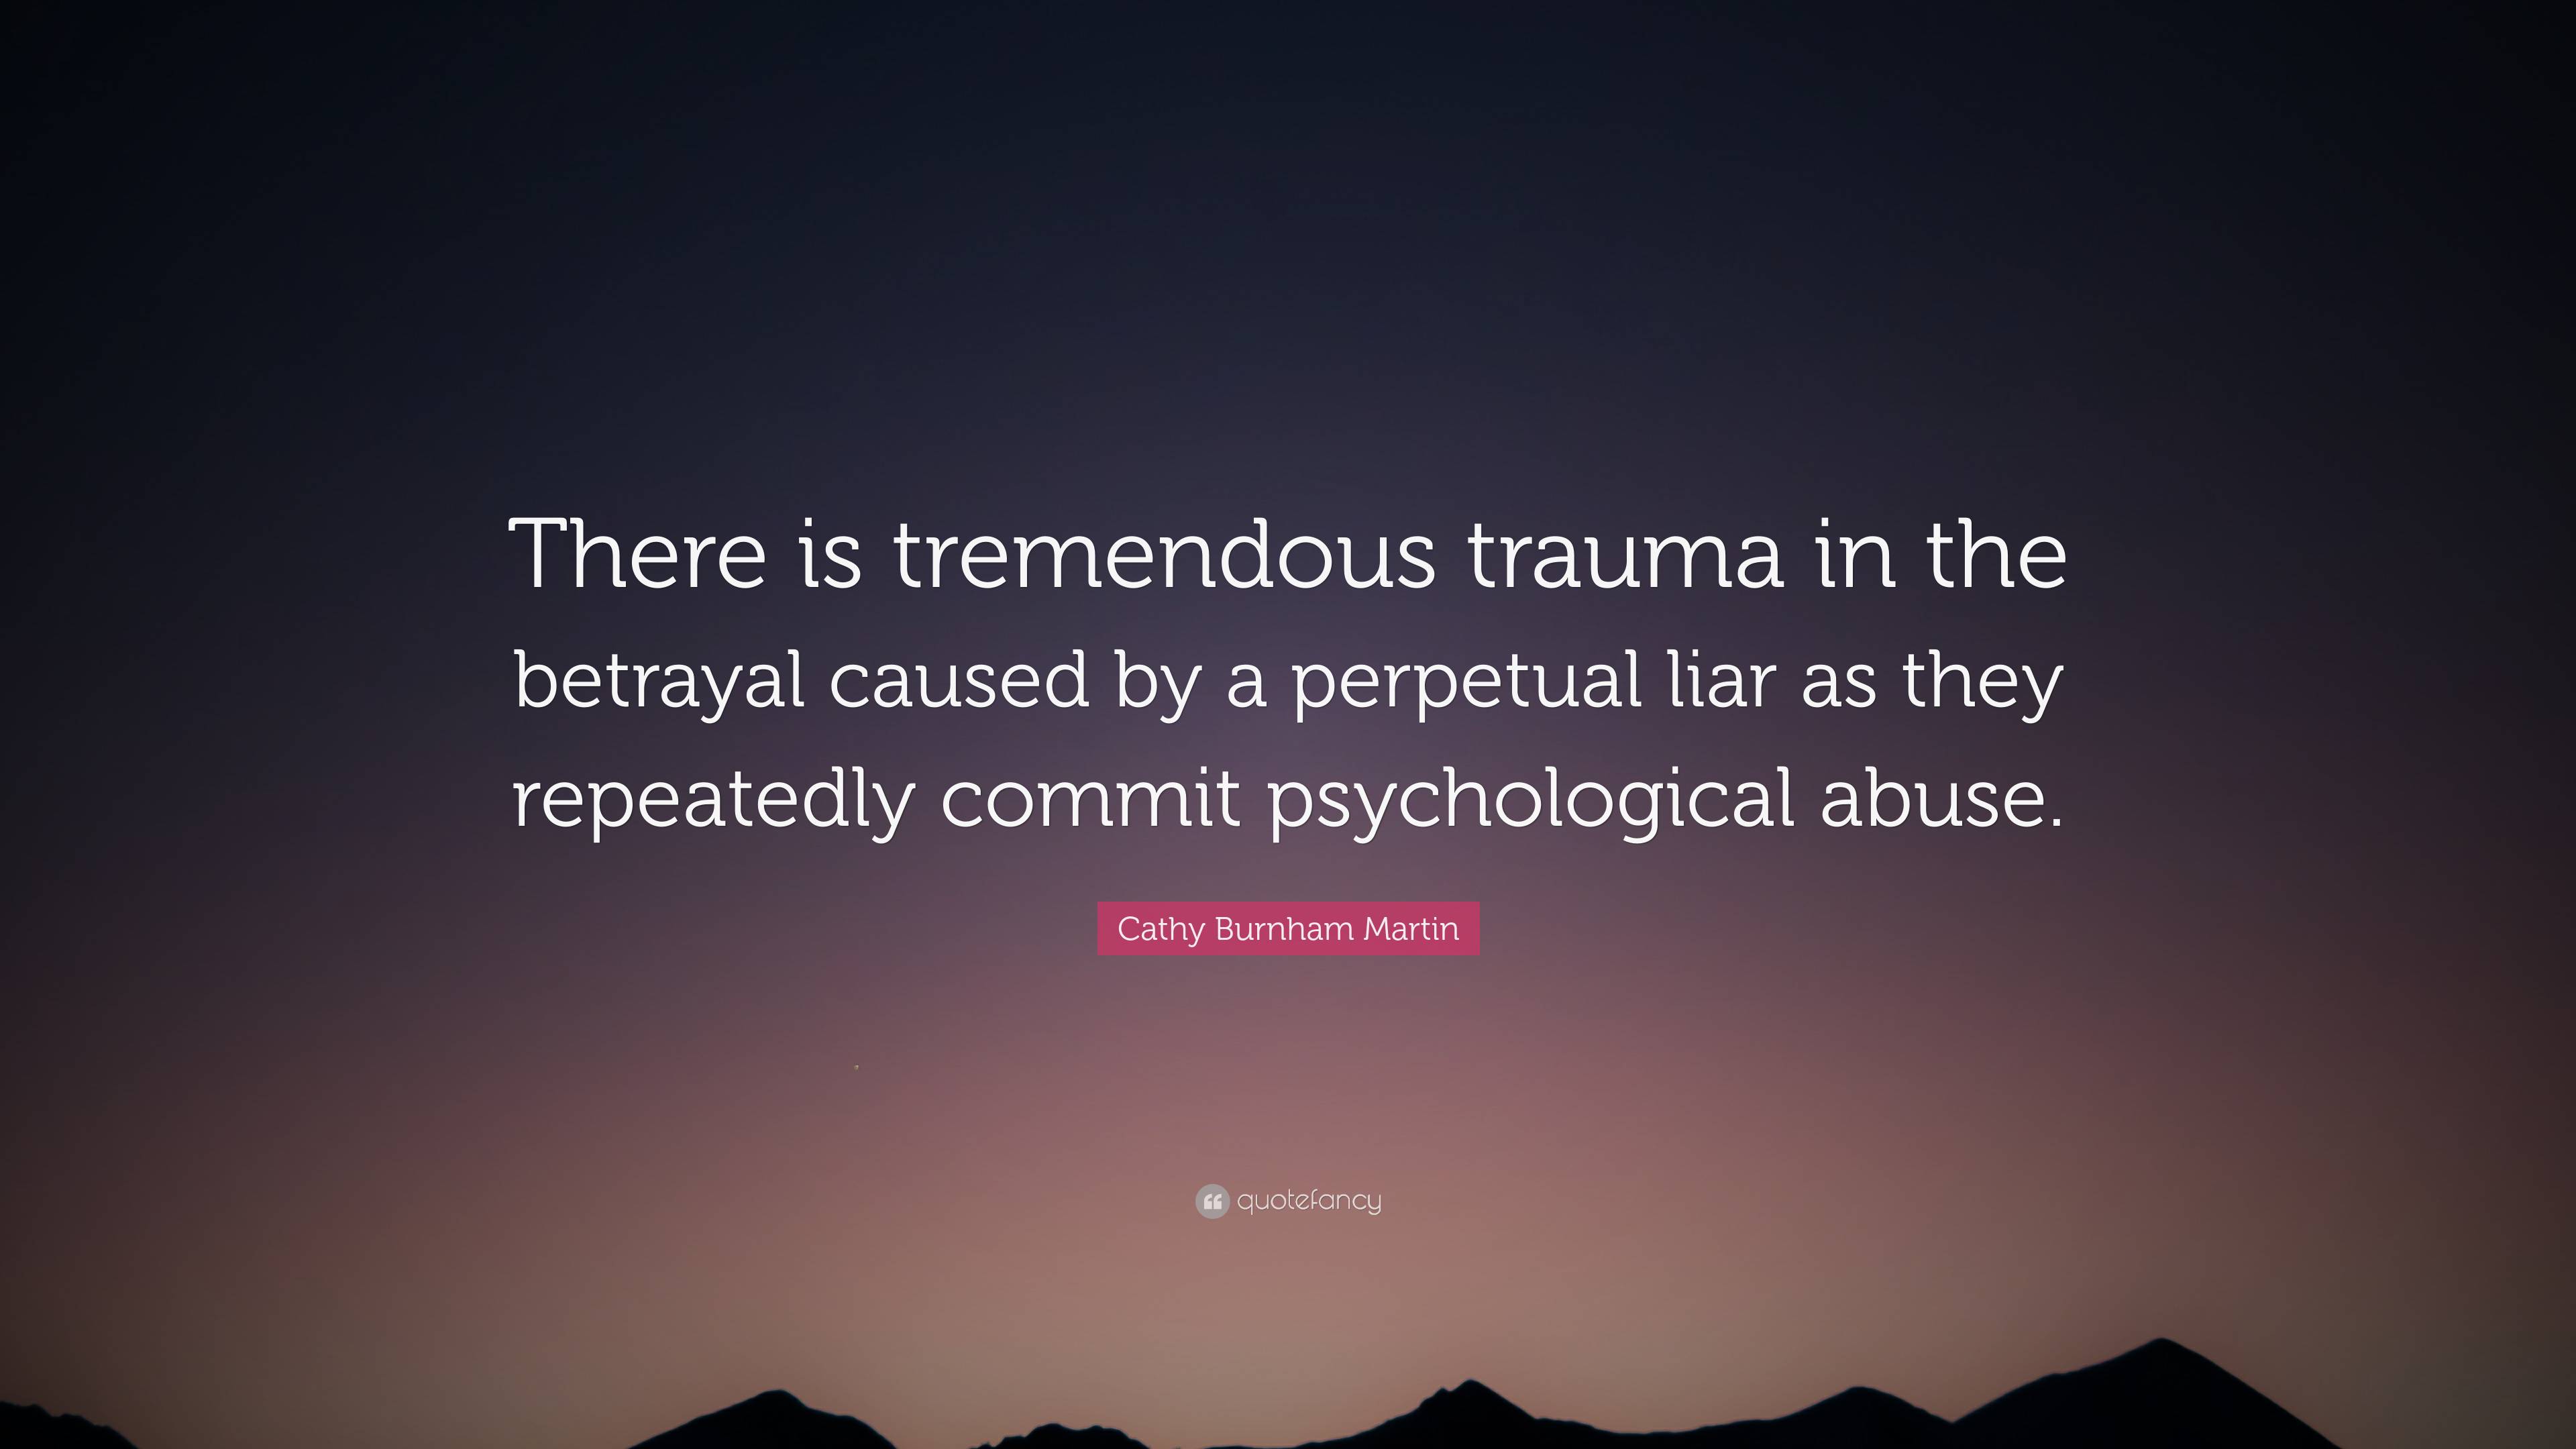 Cathy Burnham Martin Quote: “There is tremendous trauma in the betrayal ...